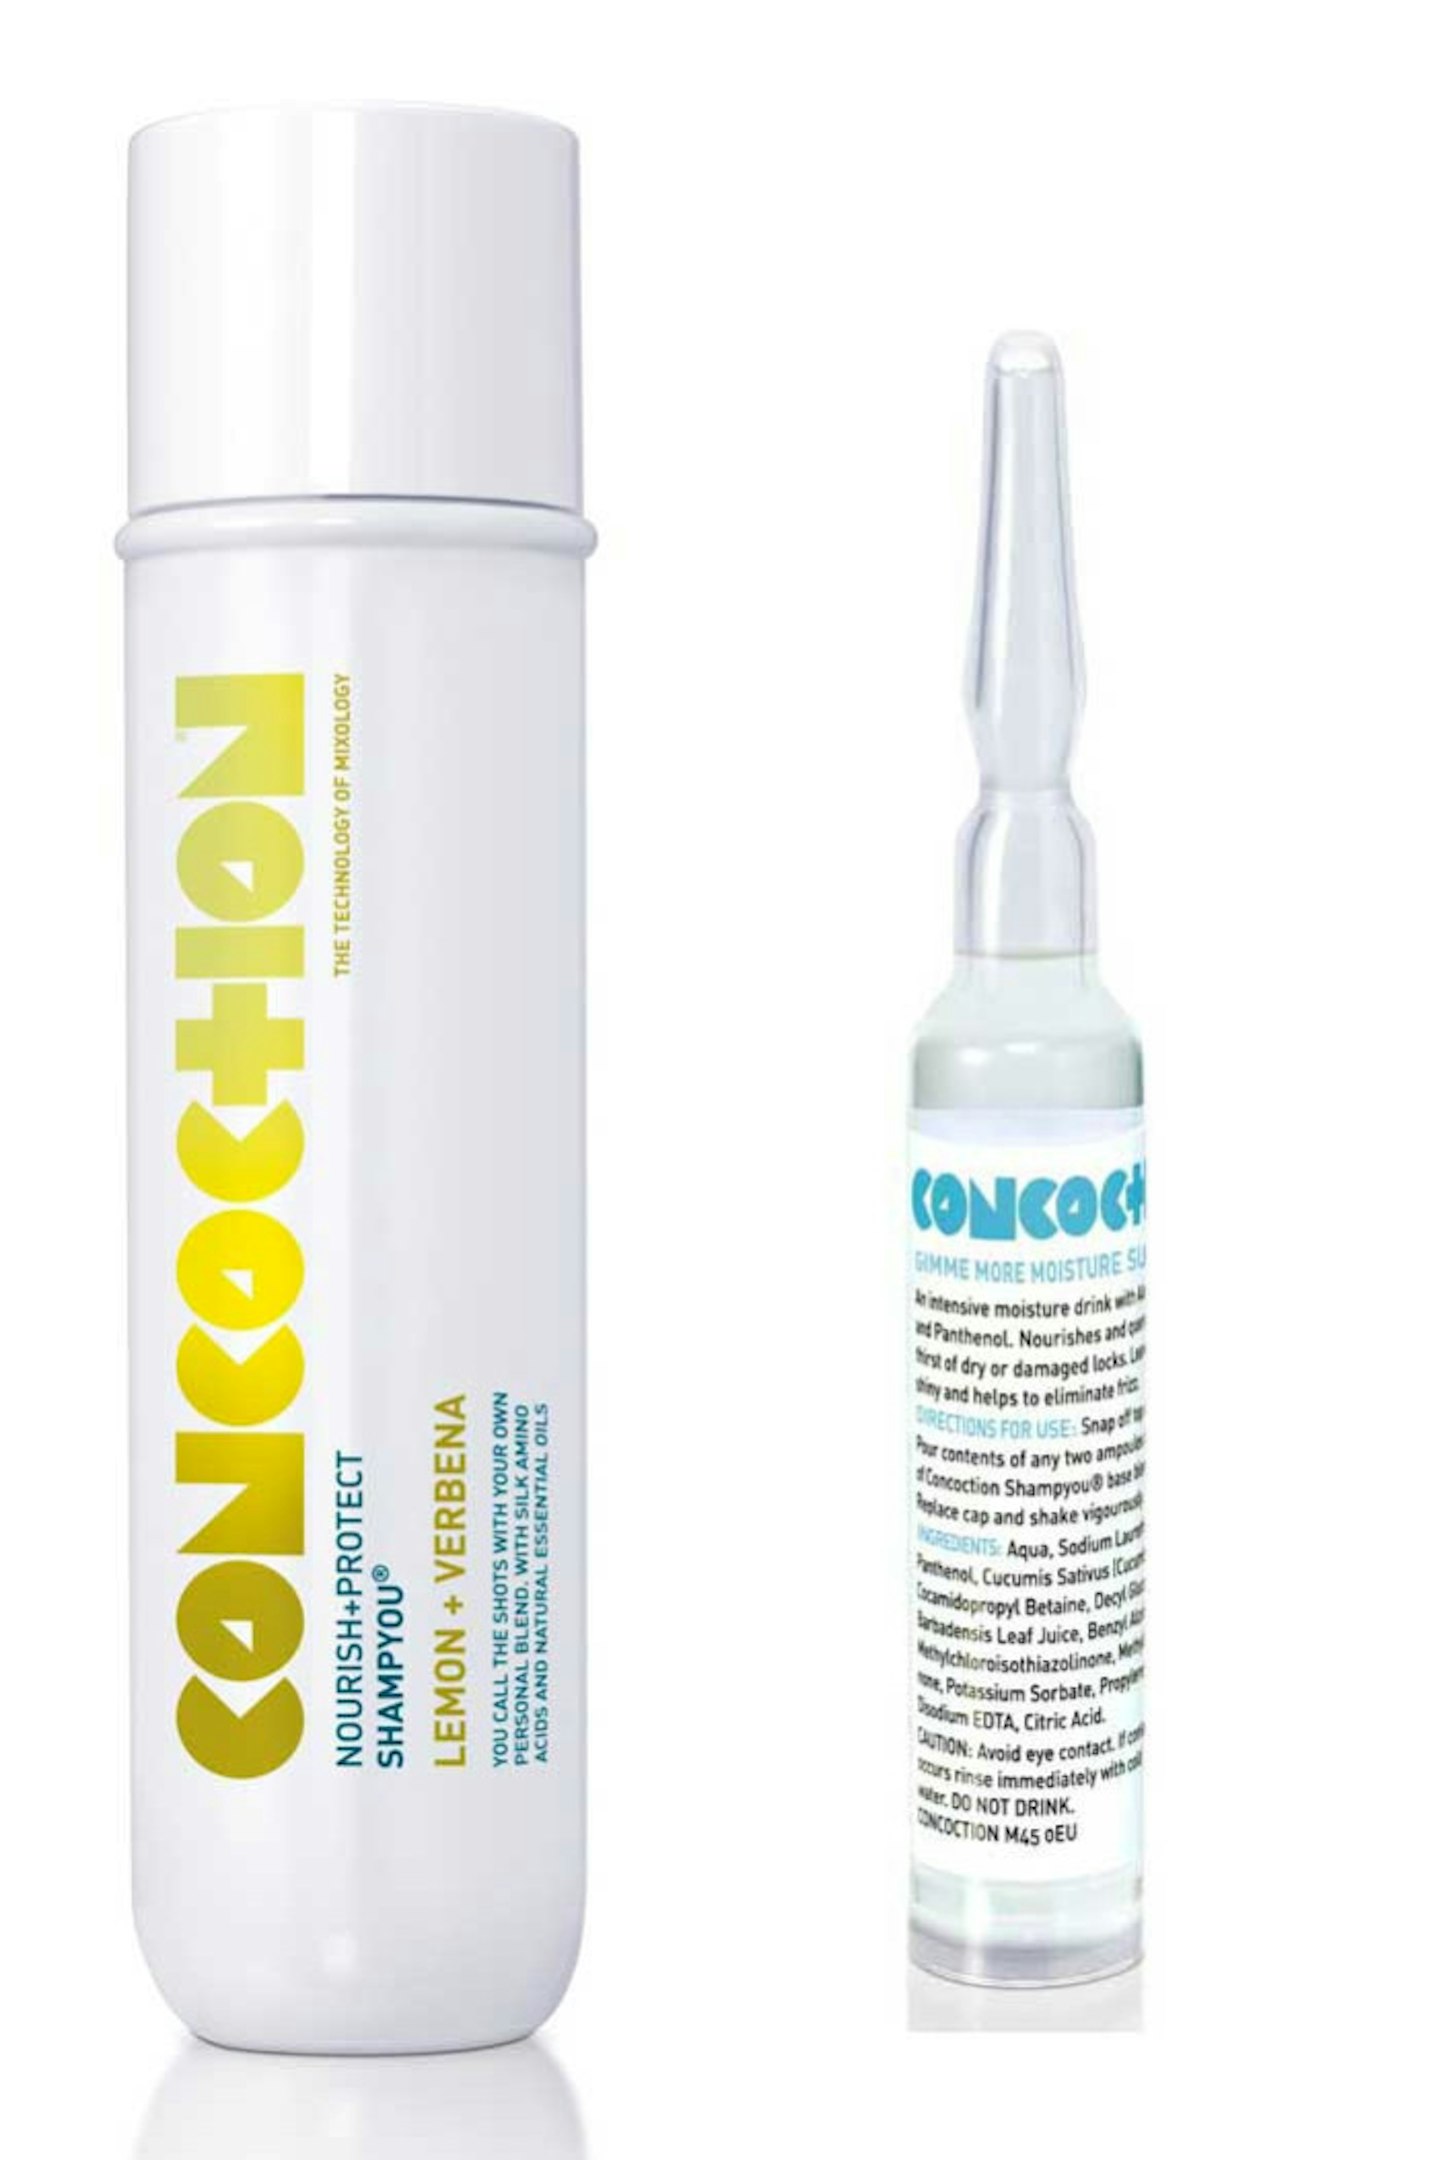 Concotion Haircare, from £11.00, Boots